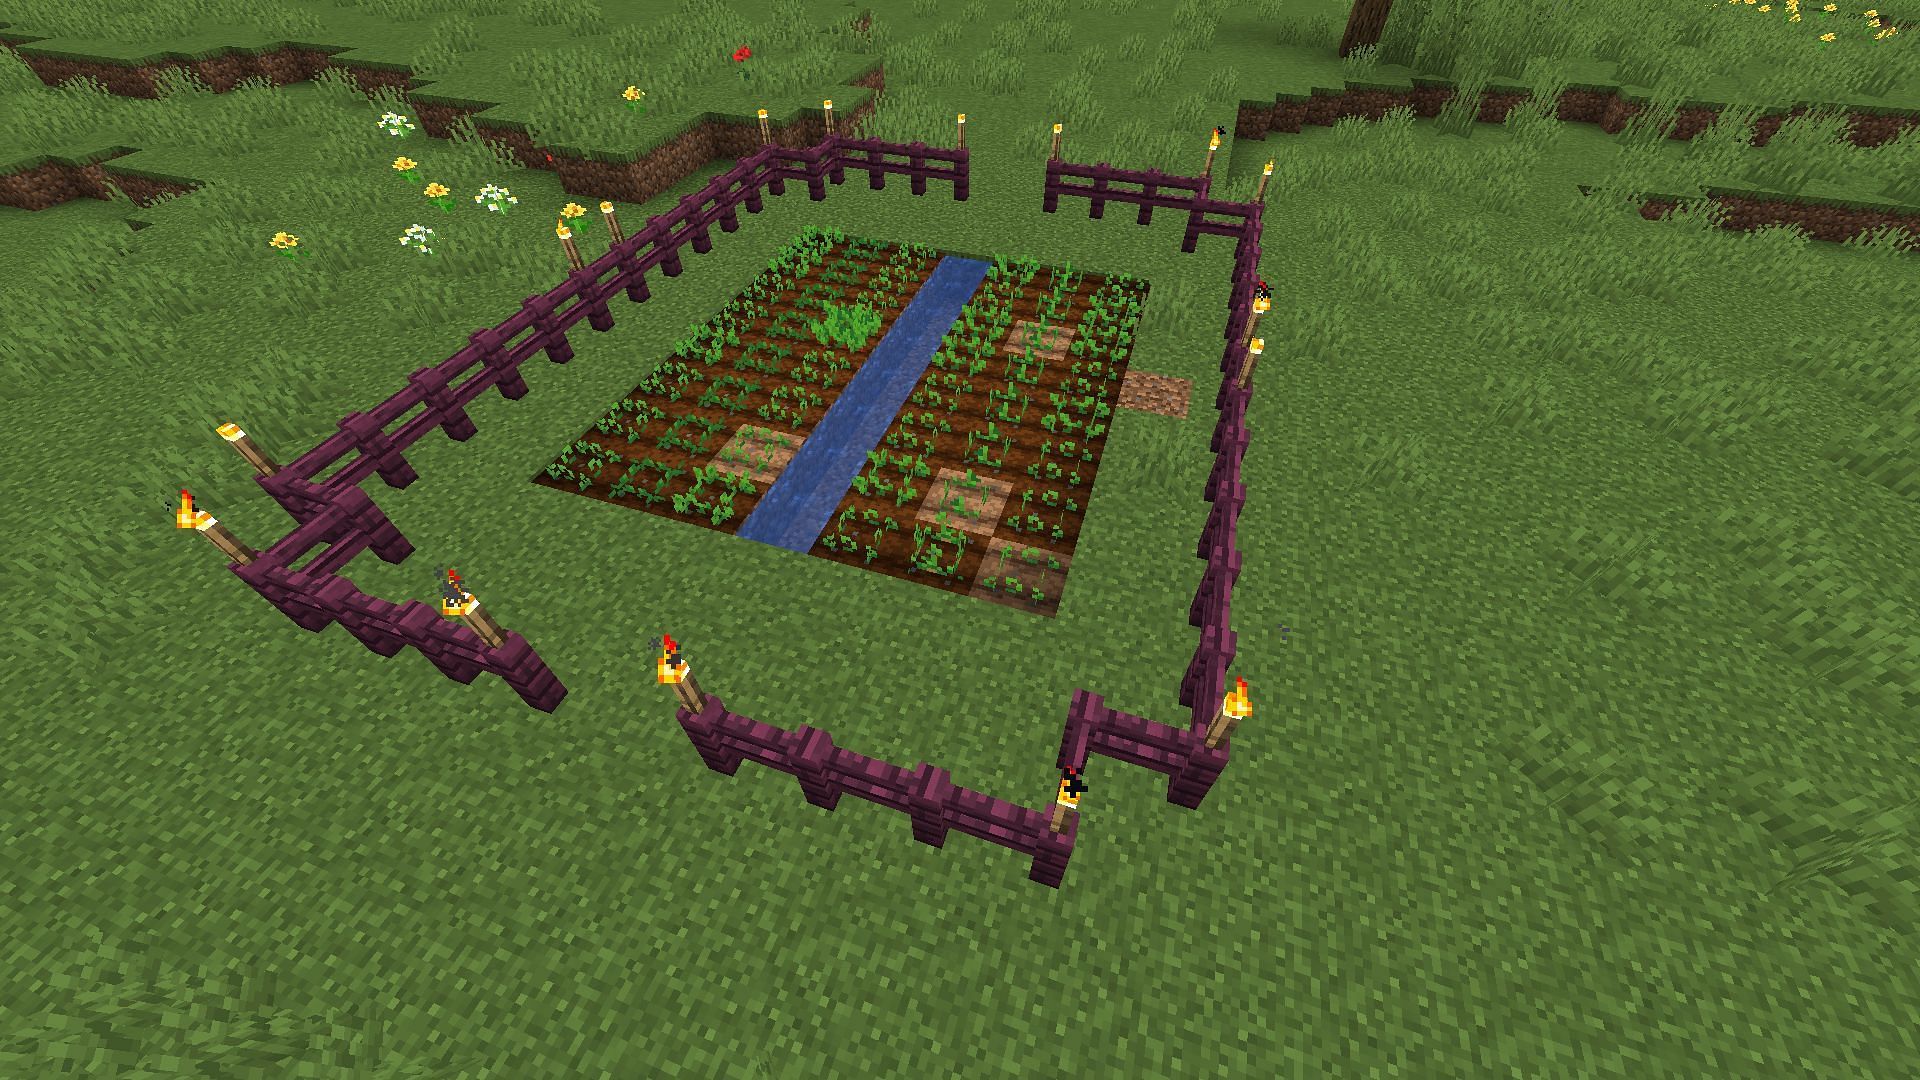 A farm in Minecraft for all the pig crops: beetroot, carrots, and potatoes (Image via Minecraft)